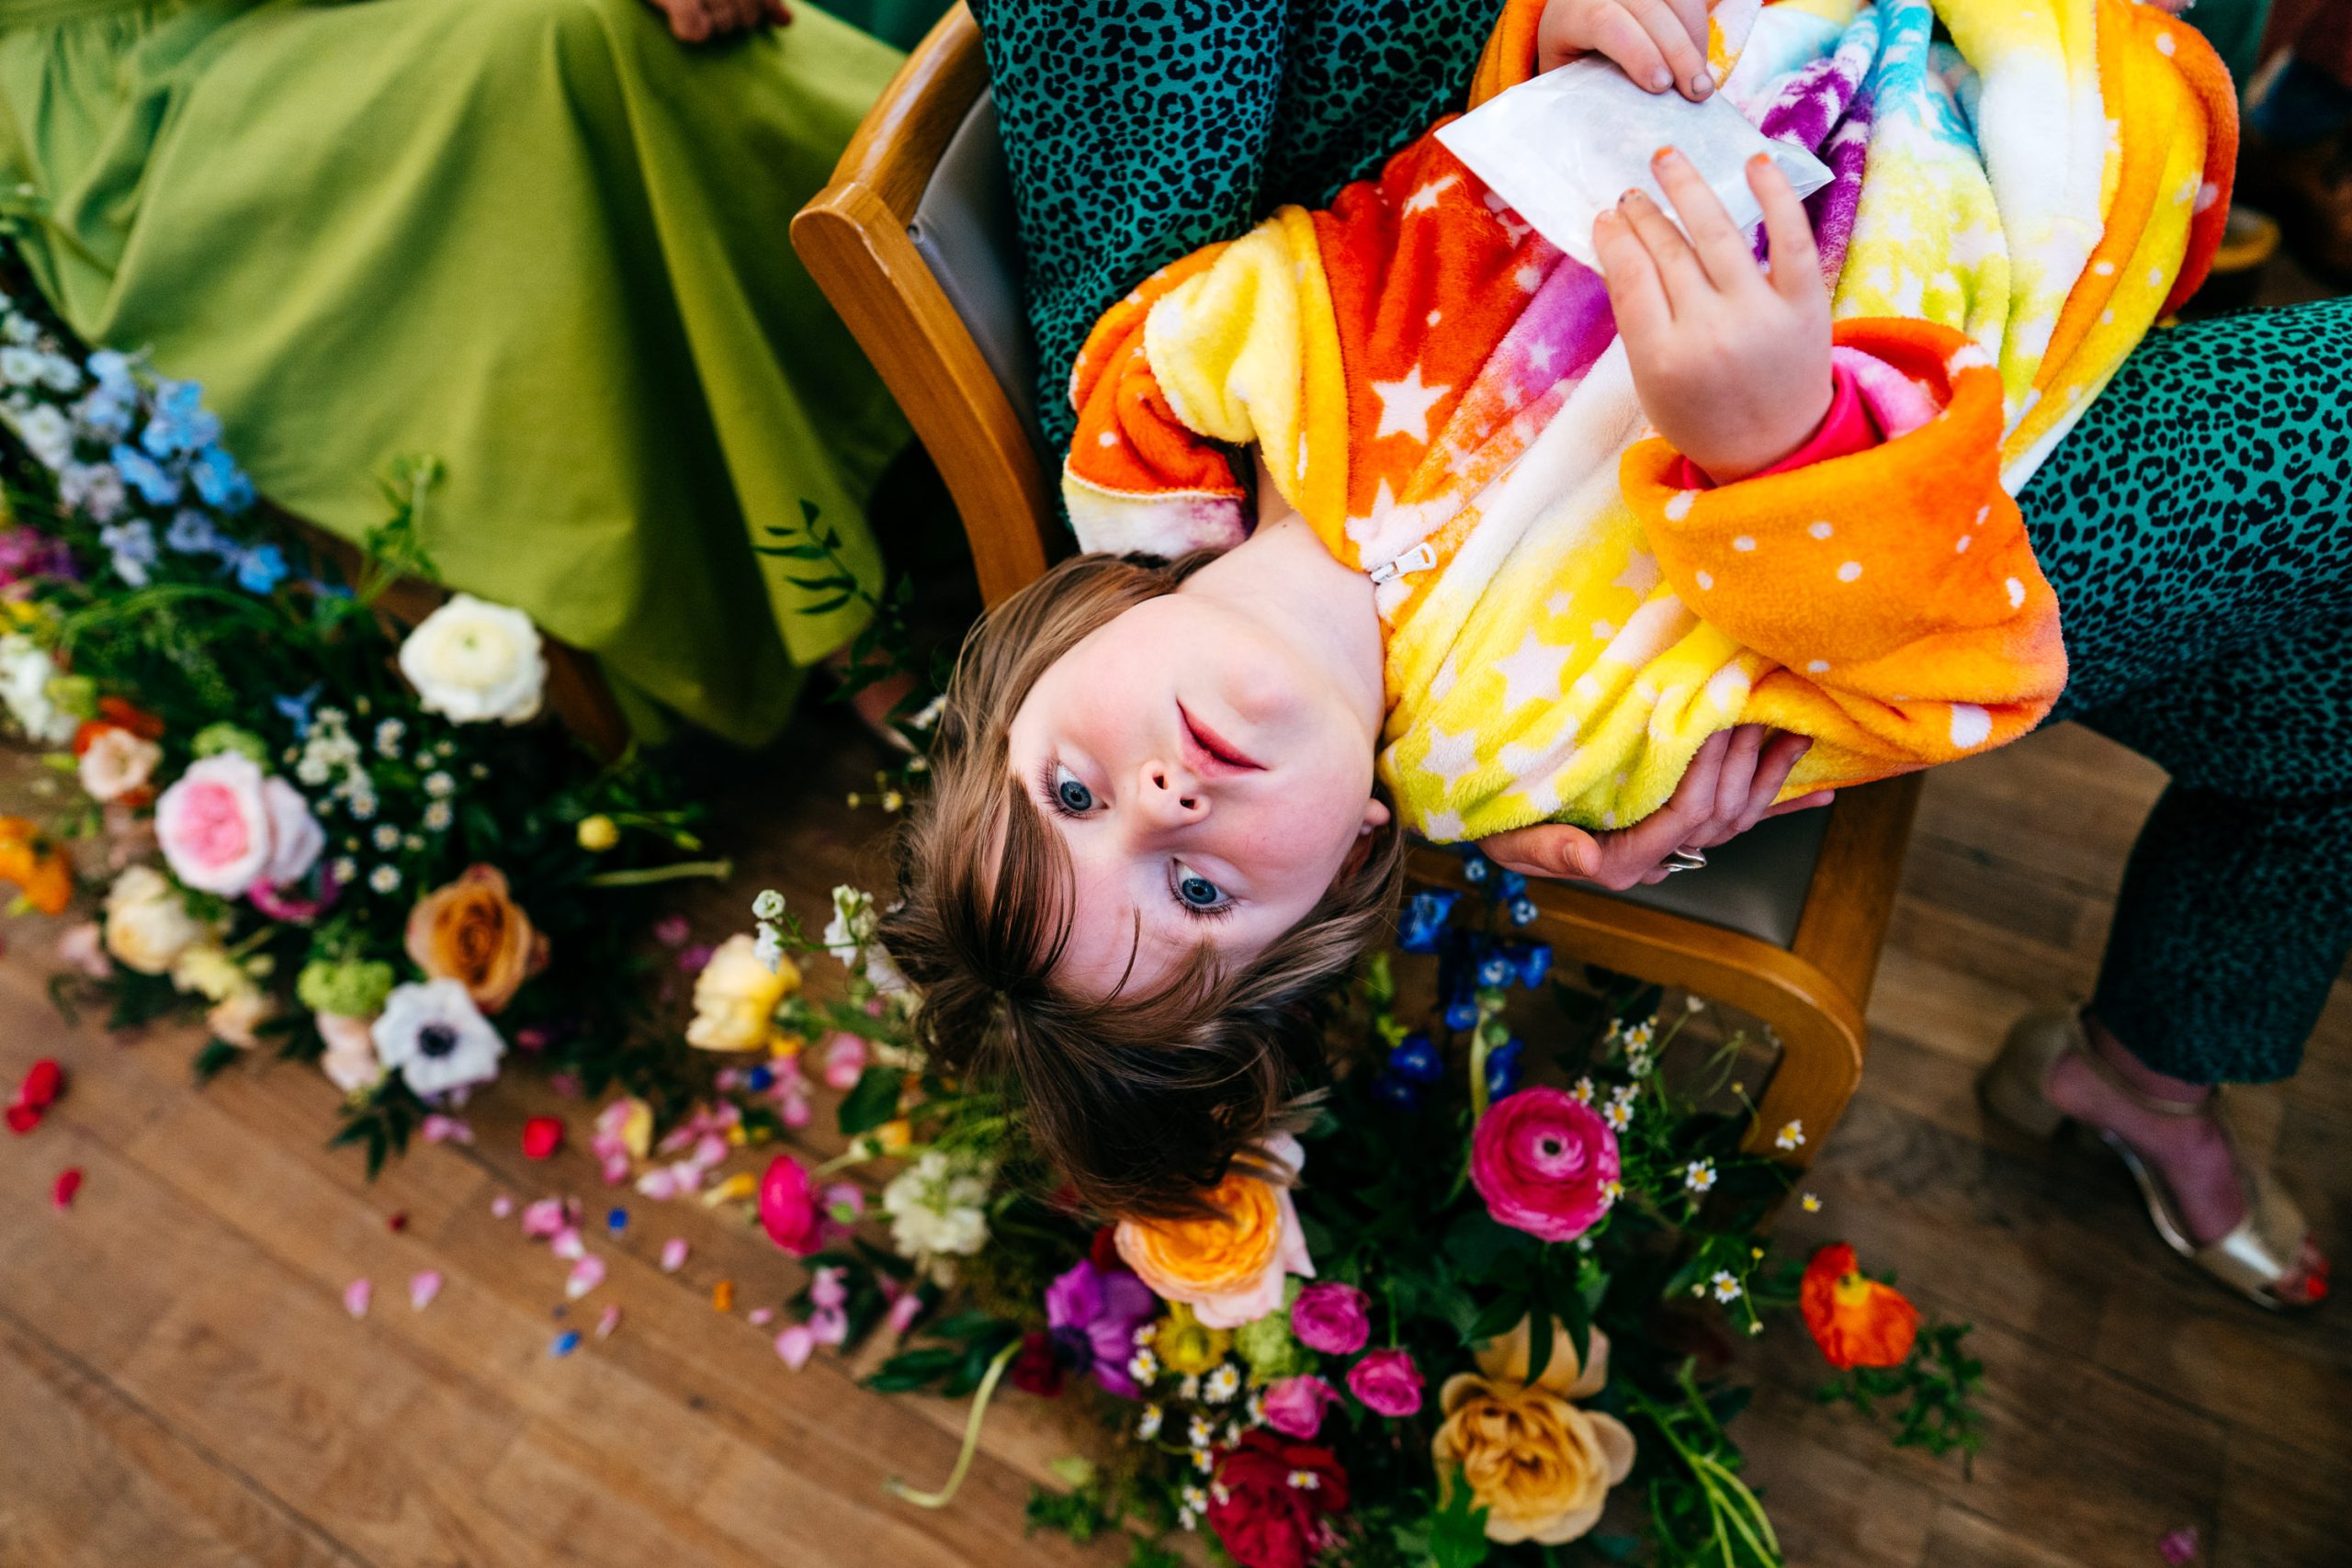 Flower girl in Unicorn outfit hangs over her mum's lap during ceremony looking bored. 